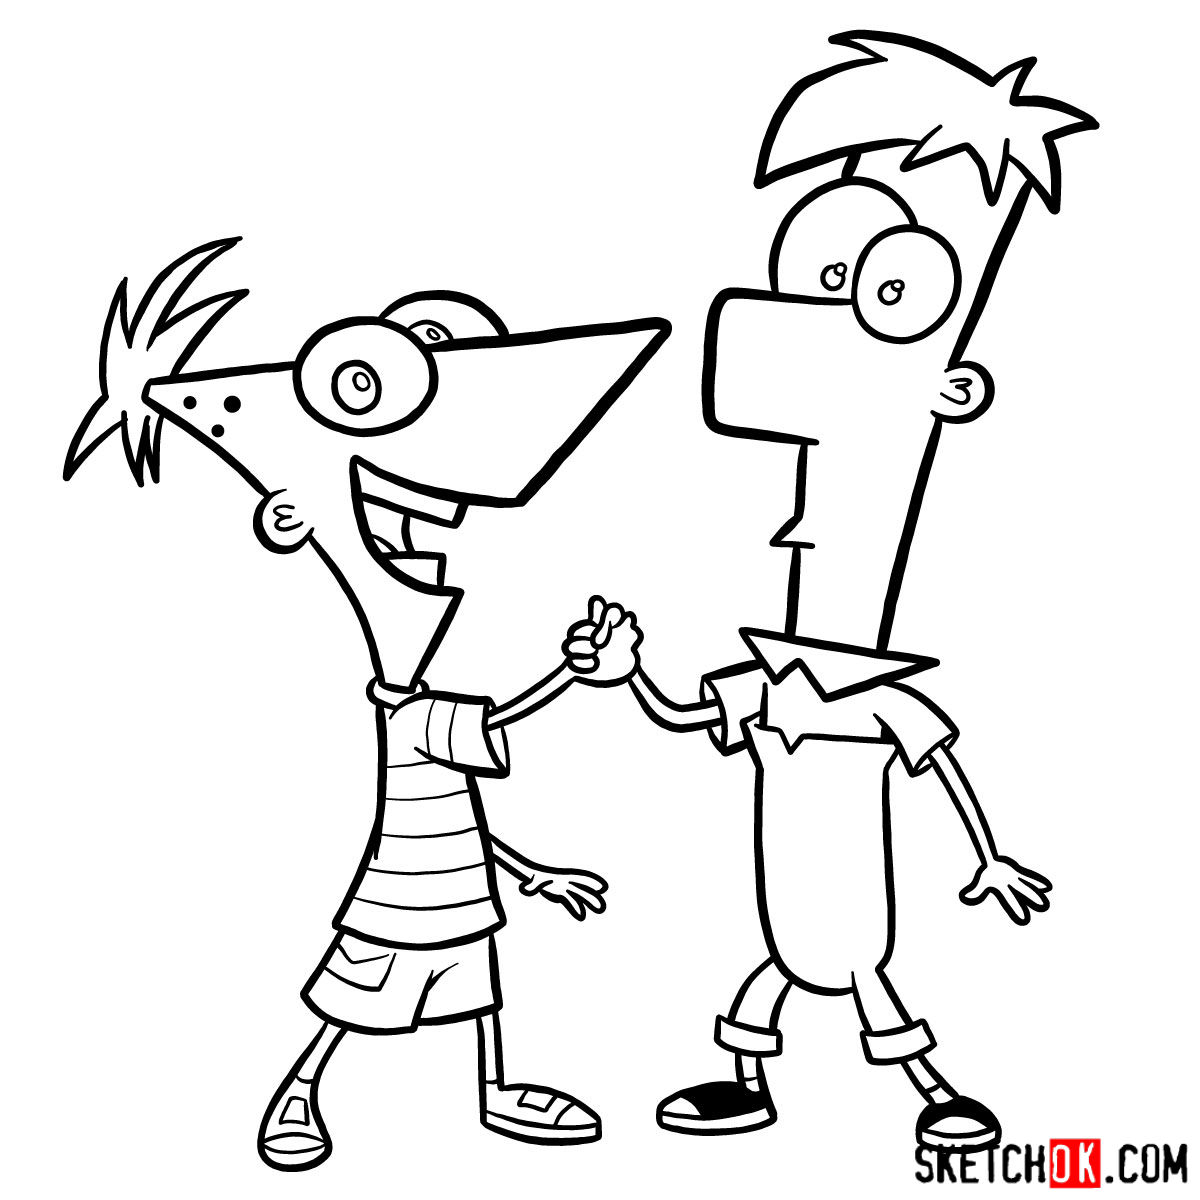 Phineas and Ferb drawing : r/phineasandferb